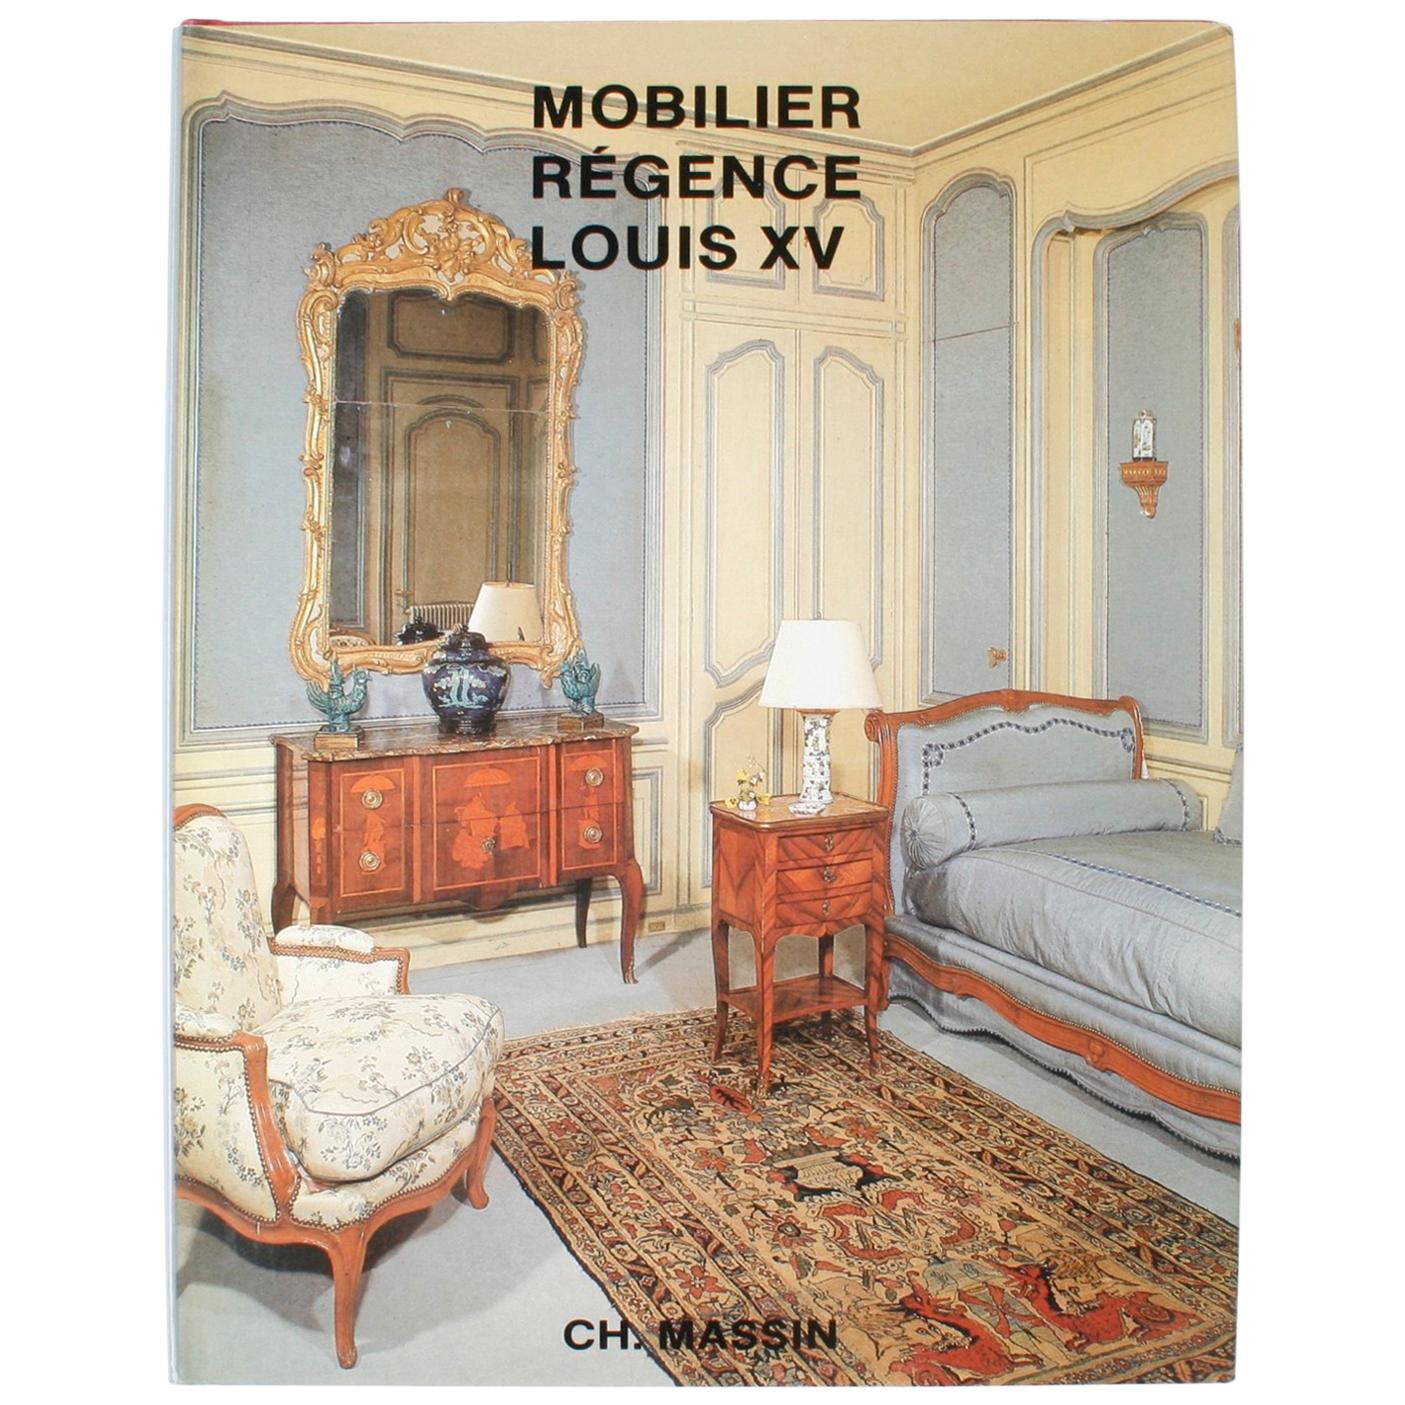 Mobilier Regence, Louis XV by Monica Burckhardt, First Edition